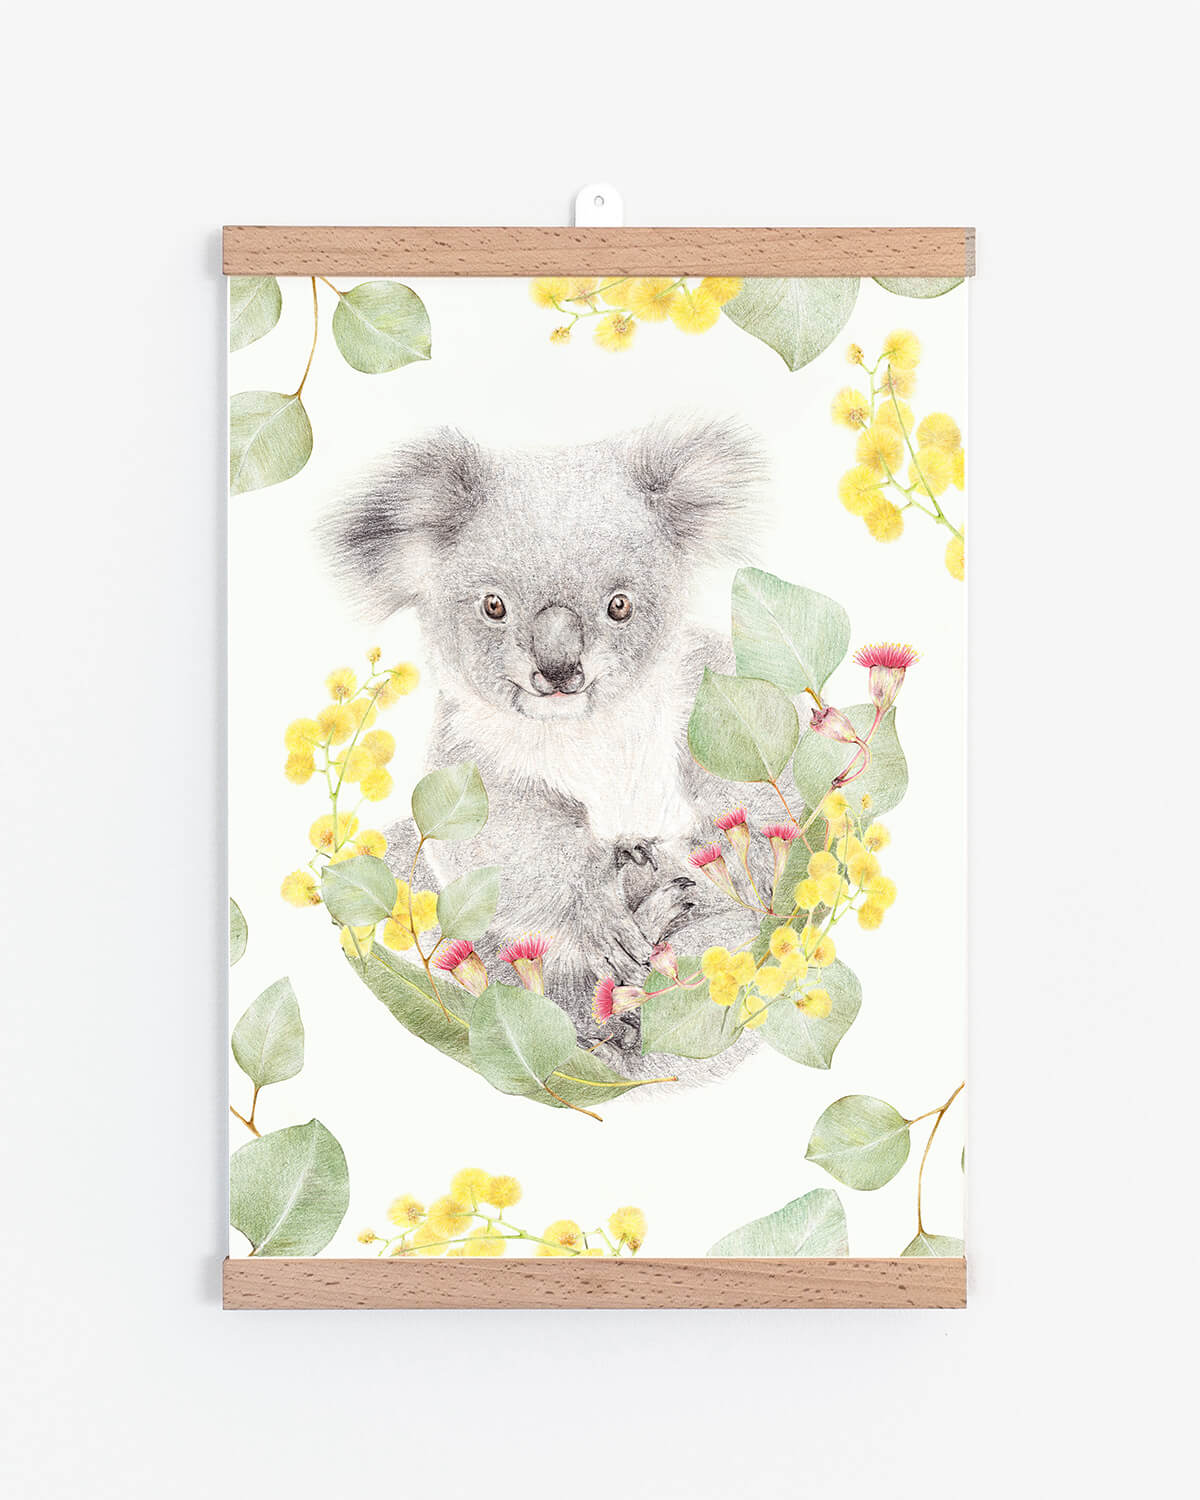 unique wall art print of Koala with Gum leaves and 